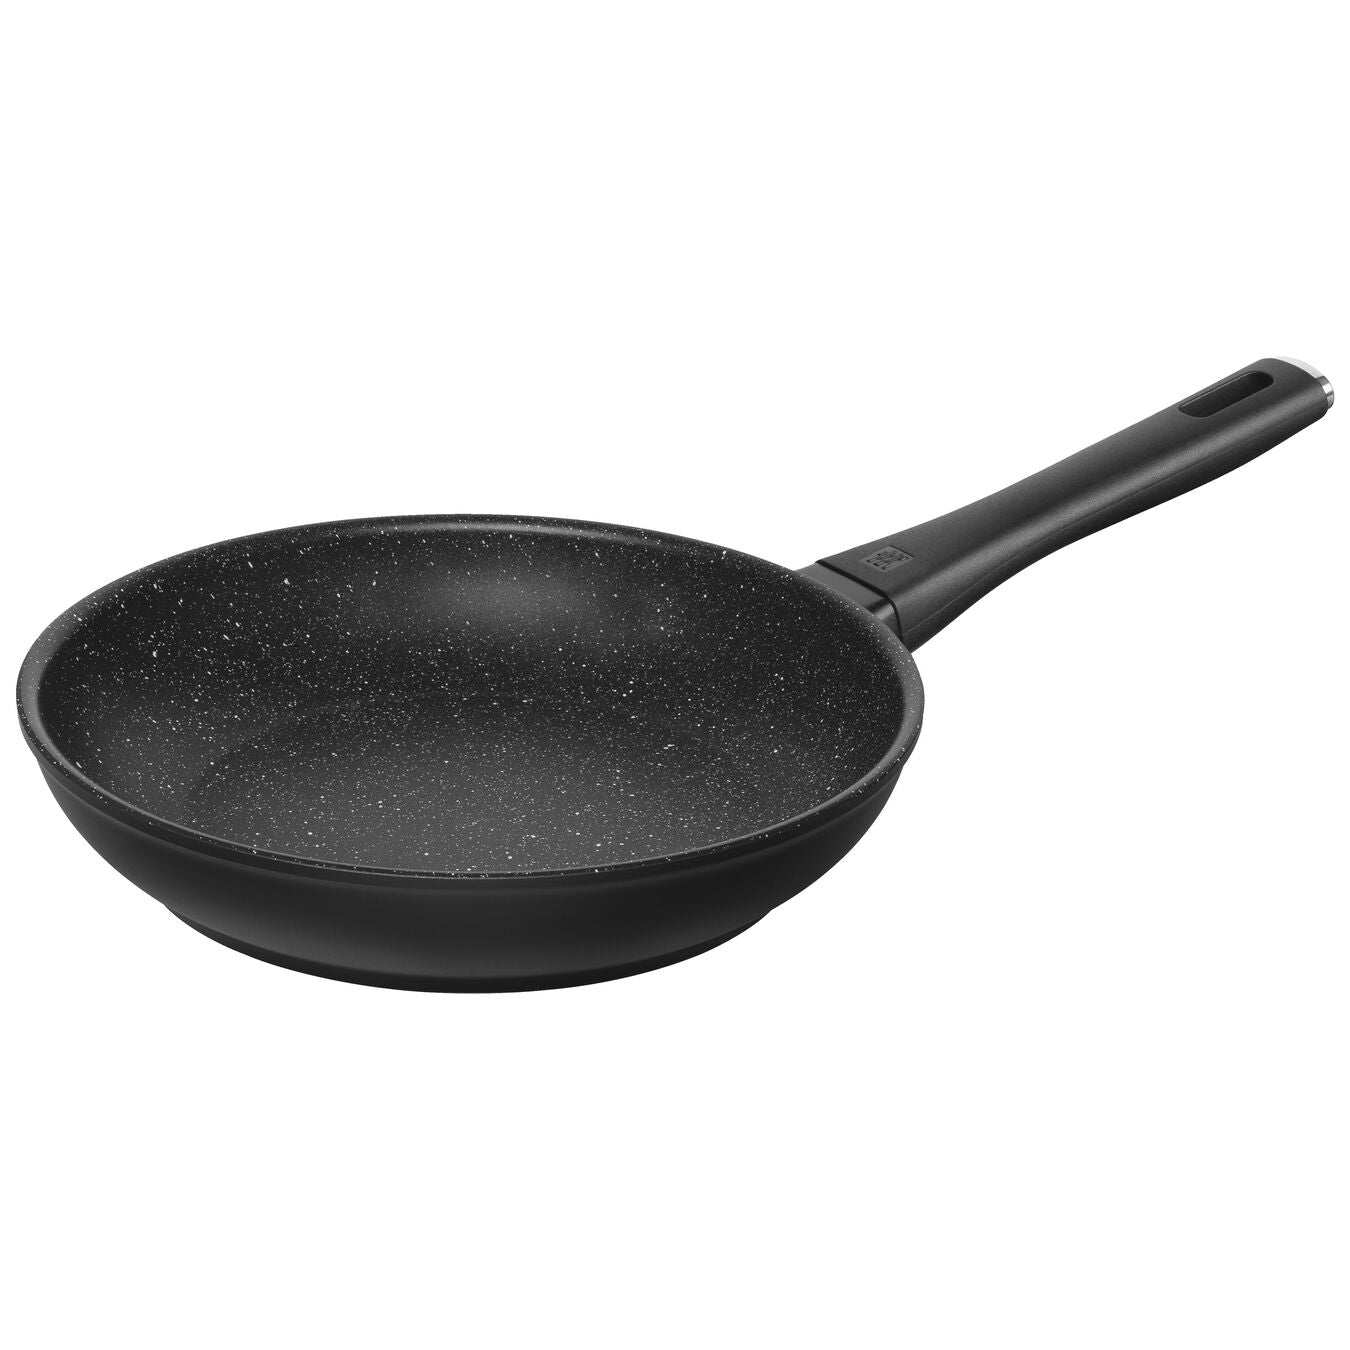 Marquina Plus Non-Stick Frying Pan - 9.5"